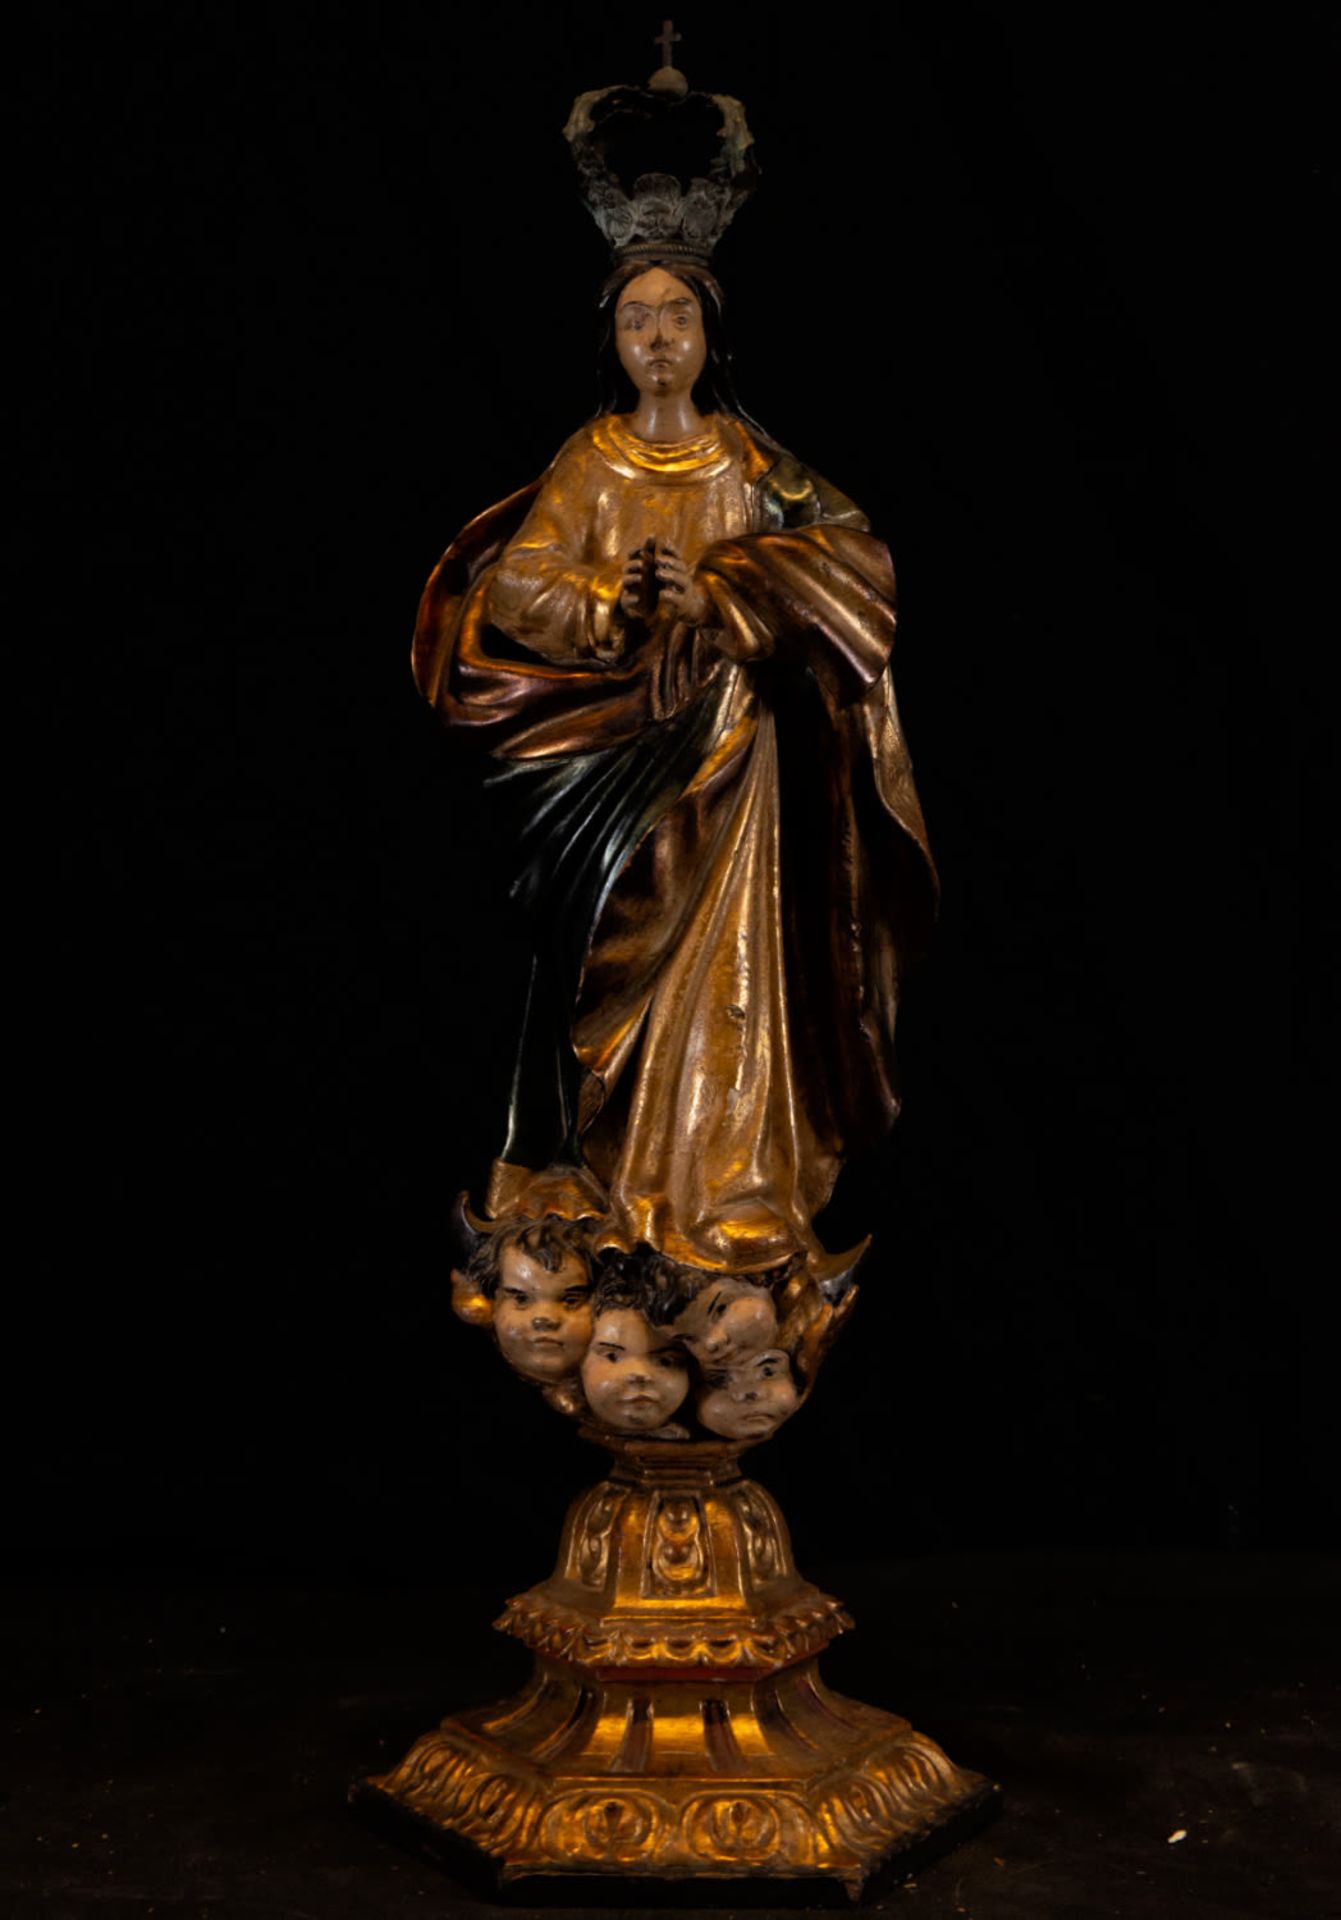 Sculpture of the Immaculate Conception, Austria or Italy, 18th century